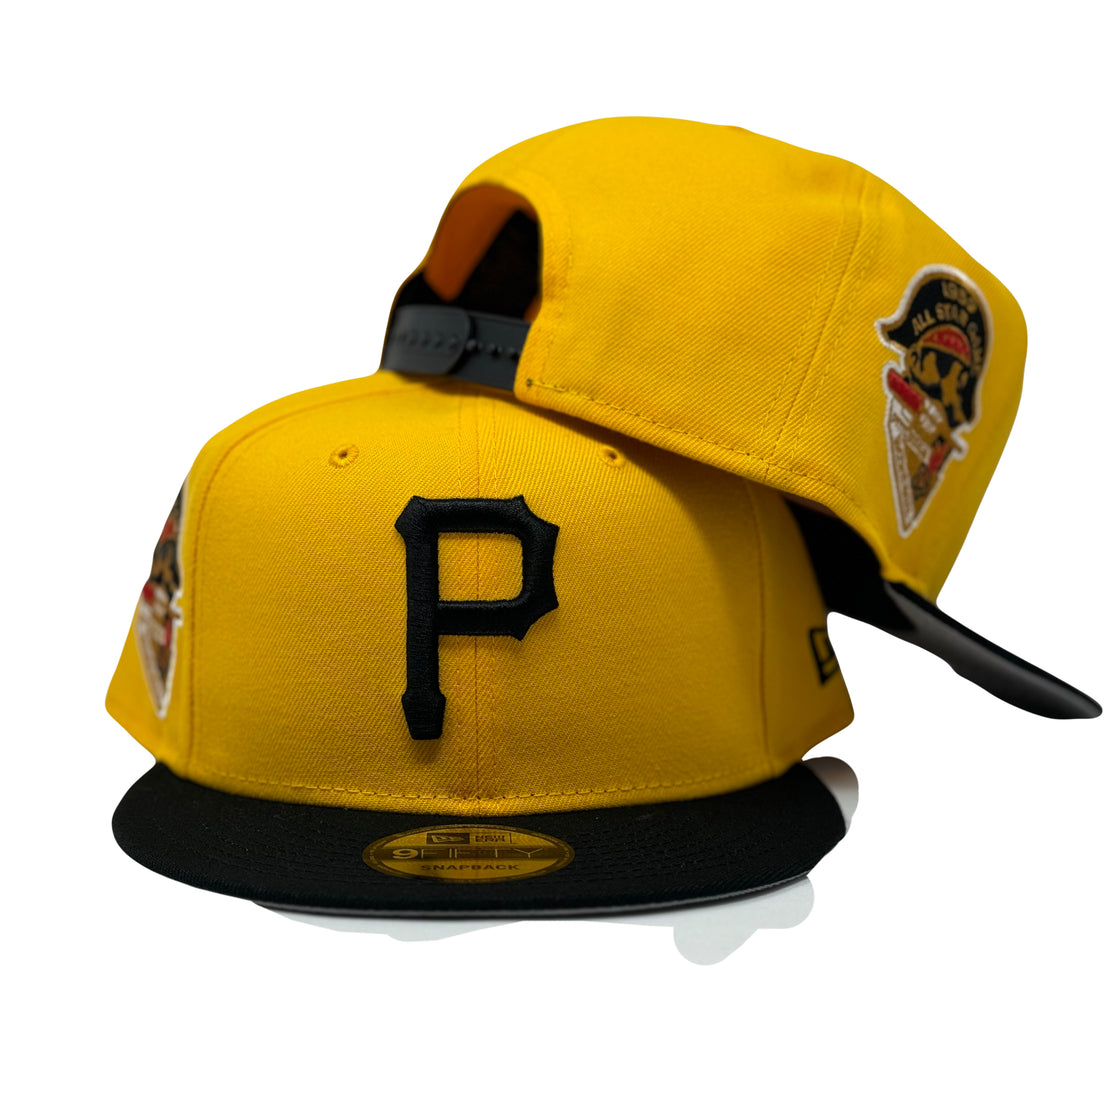 Pittsburgh Pirates 1959 All Star Game Yellow 9Fifty New Era Snapback Hat